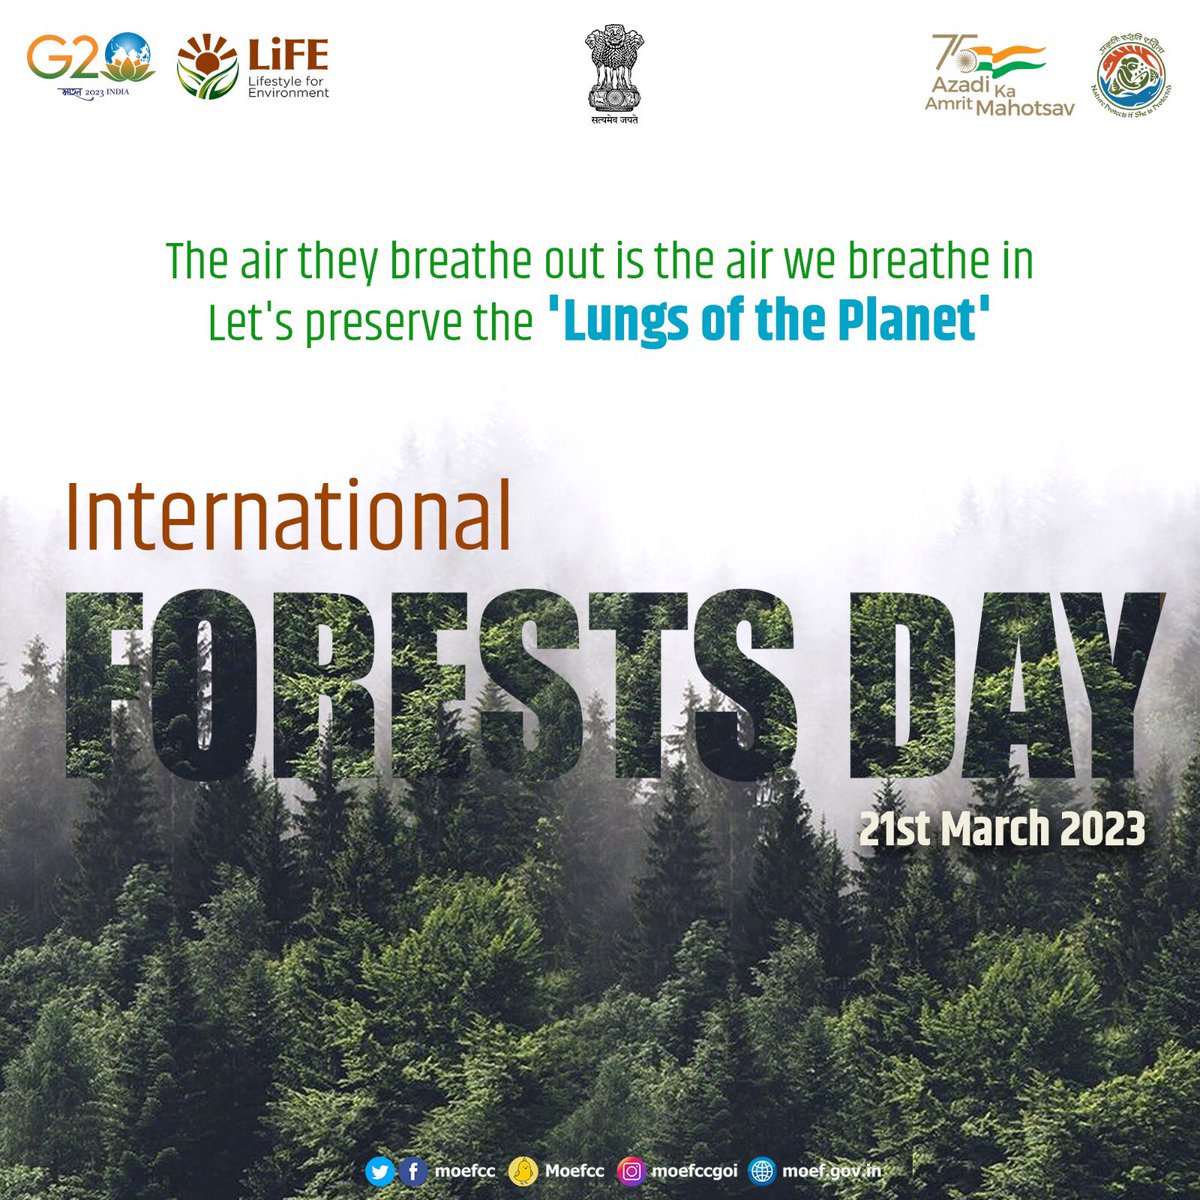 On this #InternationalForestsDay, let's save our #Forests and safeguard these precious natural resources for a sustainable future!
#ForestsDay